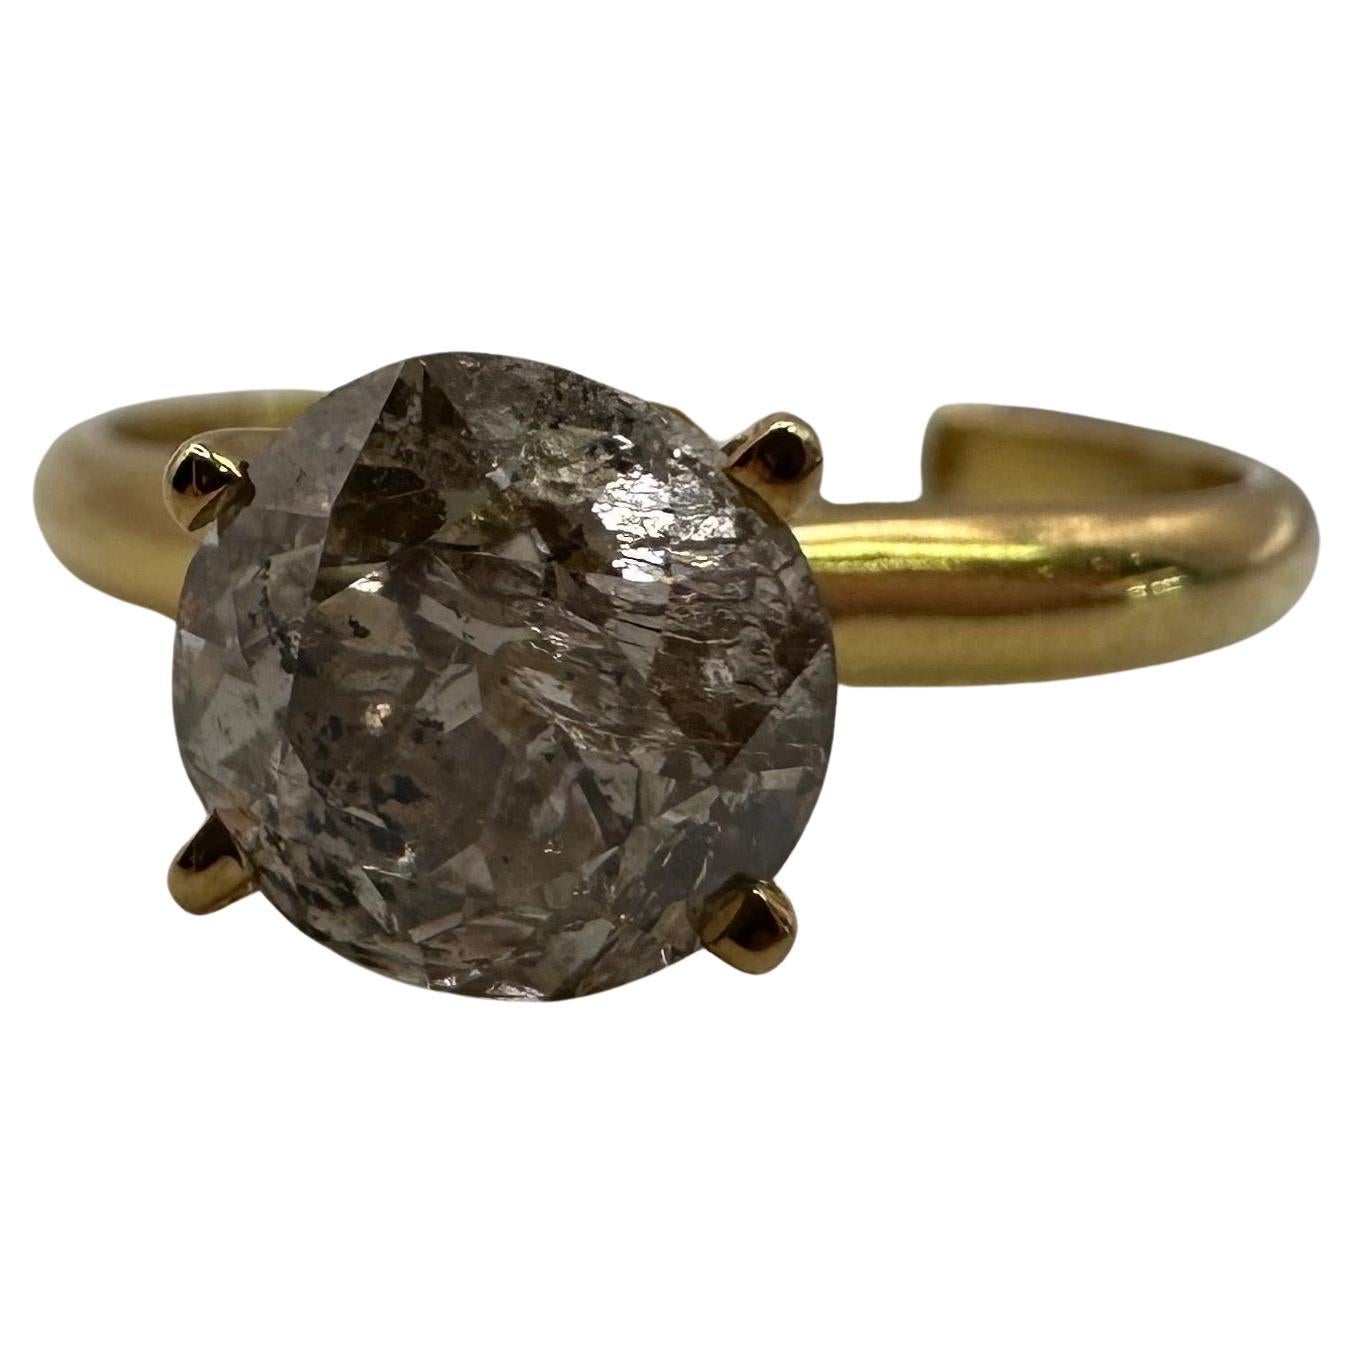 Interesting diamond ring with a center diamond often called salt and pepper or galaxy for its unique pattern inside the diamond. This ring is a size 6.5 and can be re-sized.
Metal Type: 14KT
Natural Side Diamond(s):
Color: H
Cut:Round